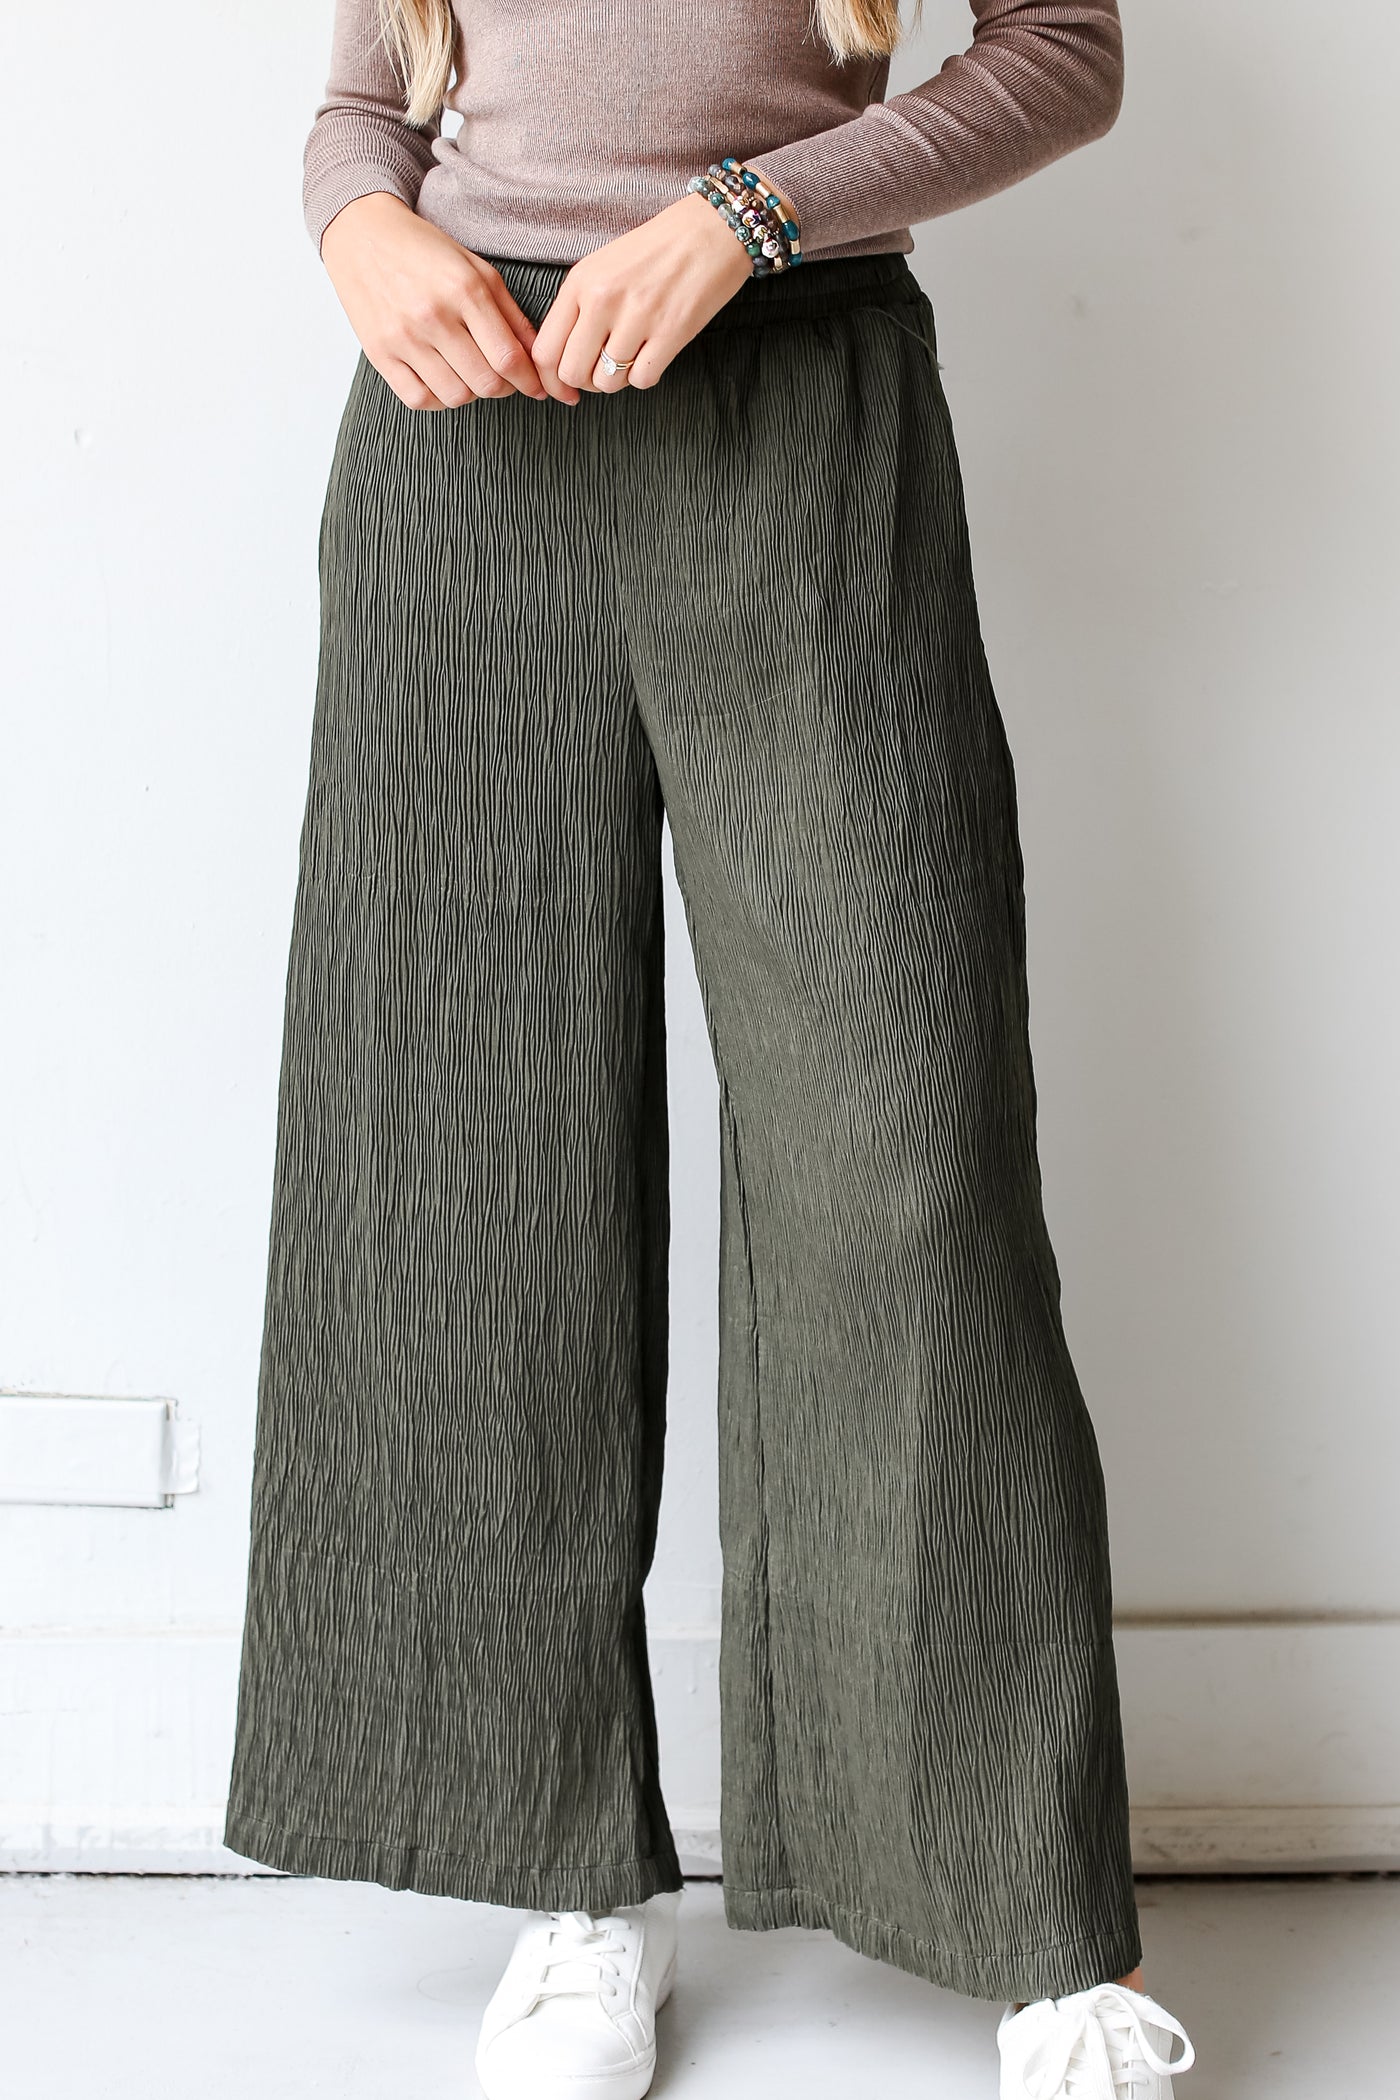 green pants for fall